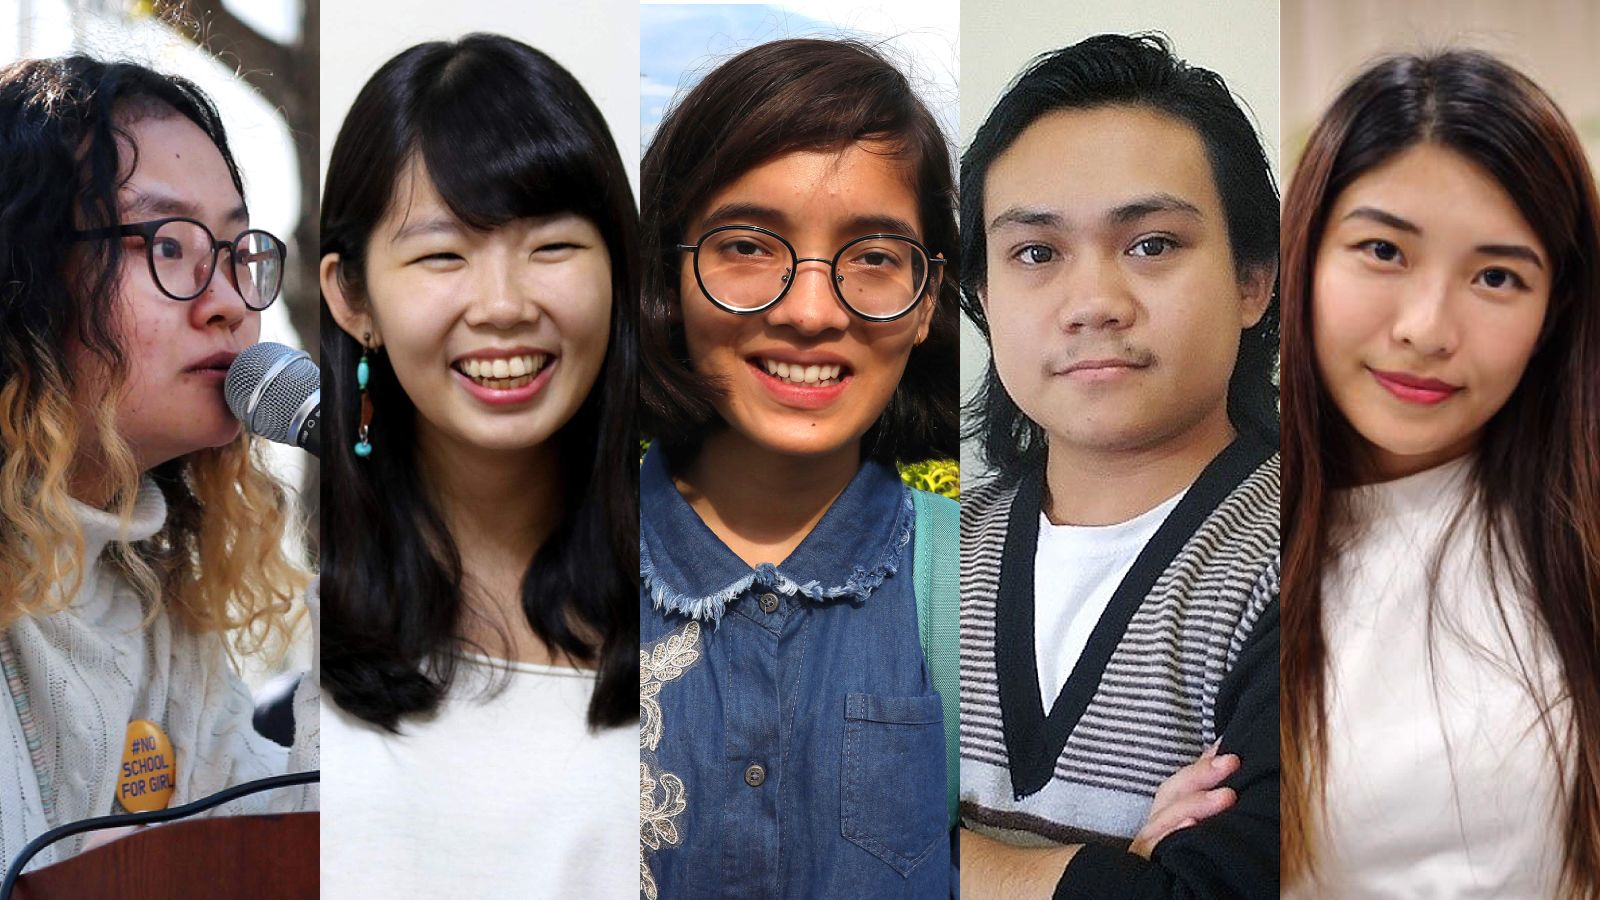 Small Asian Girl Sex - Meet 5 young activists who drove change in Asia this year | CNN